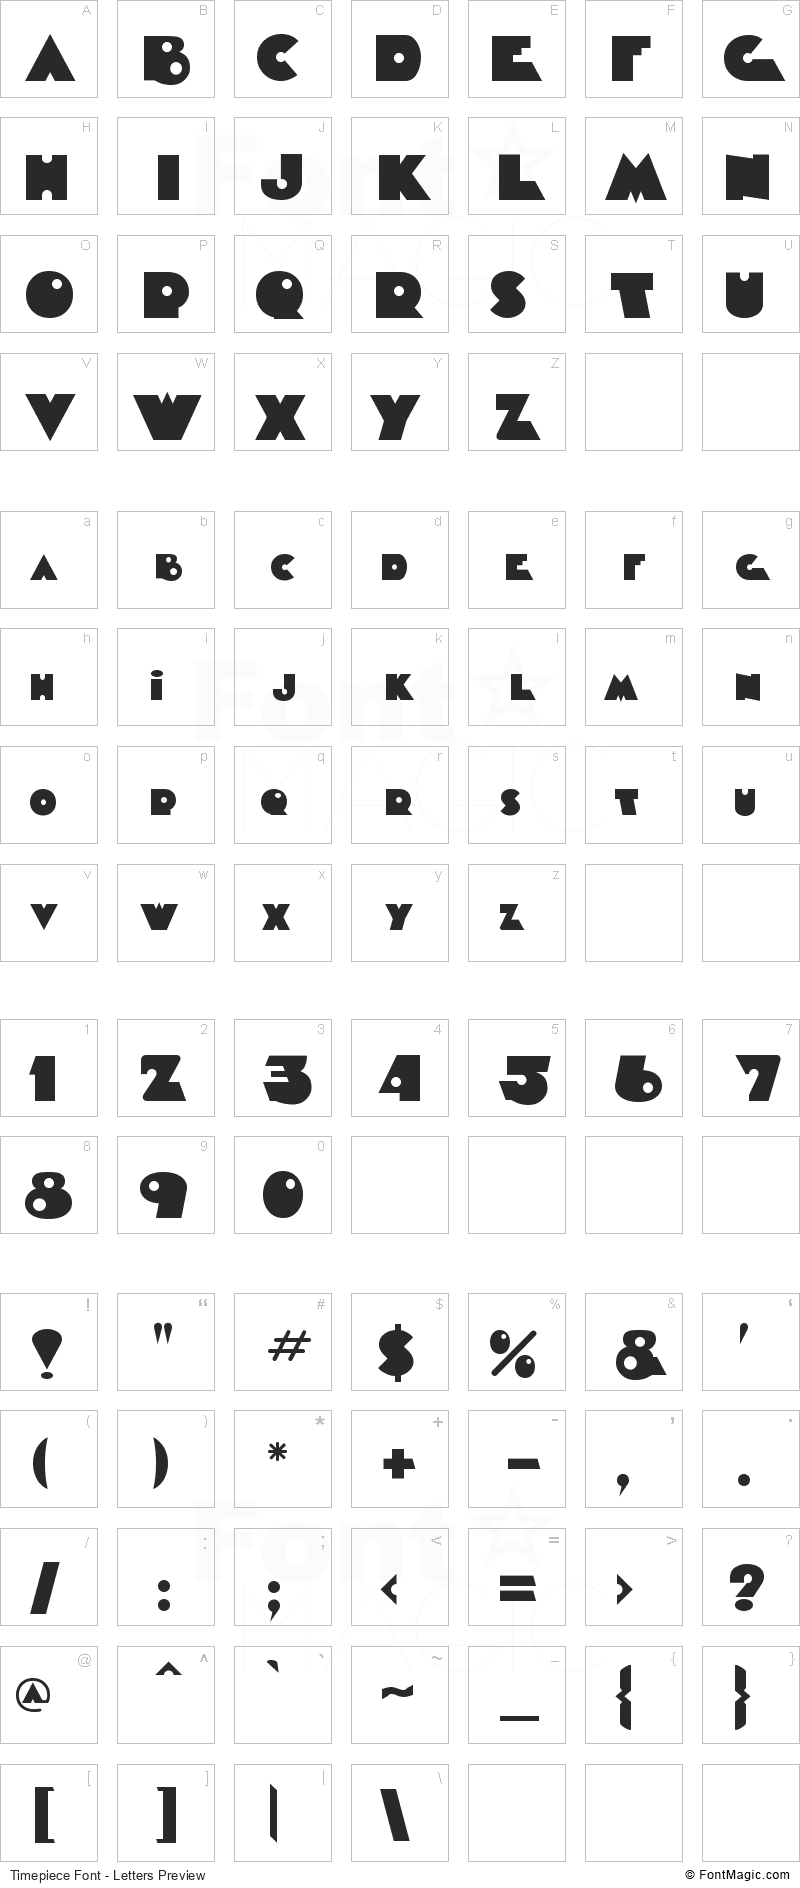 Timepiece Font - All Latters Preview Chart